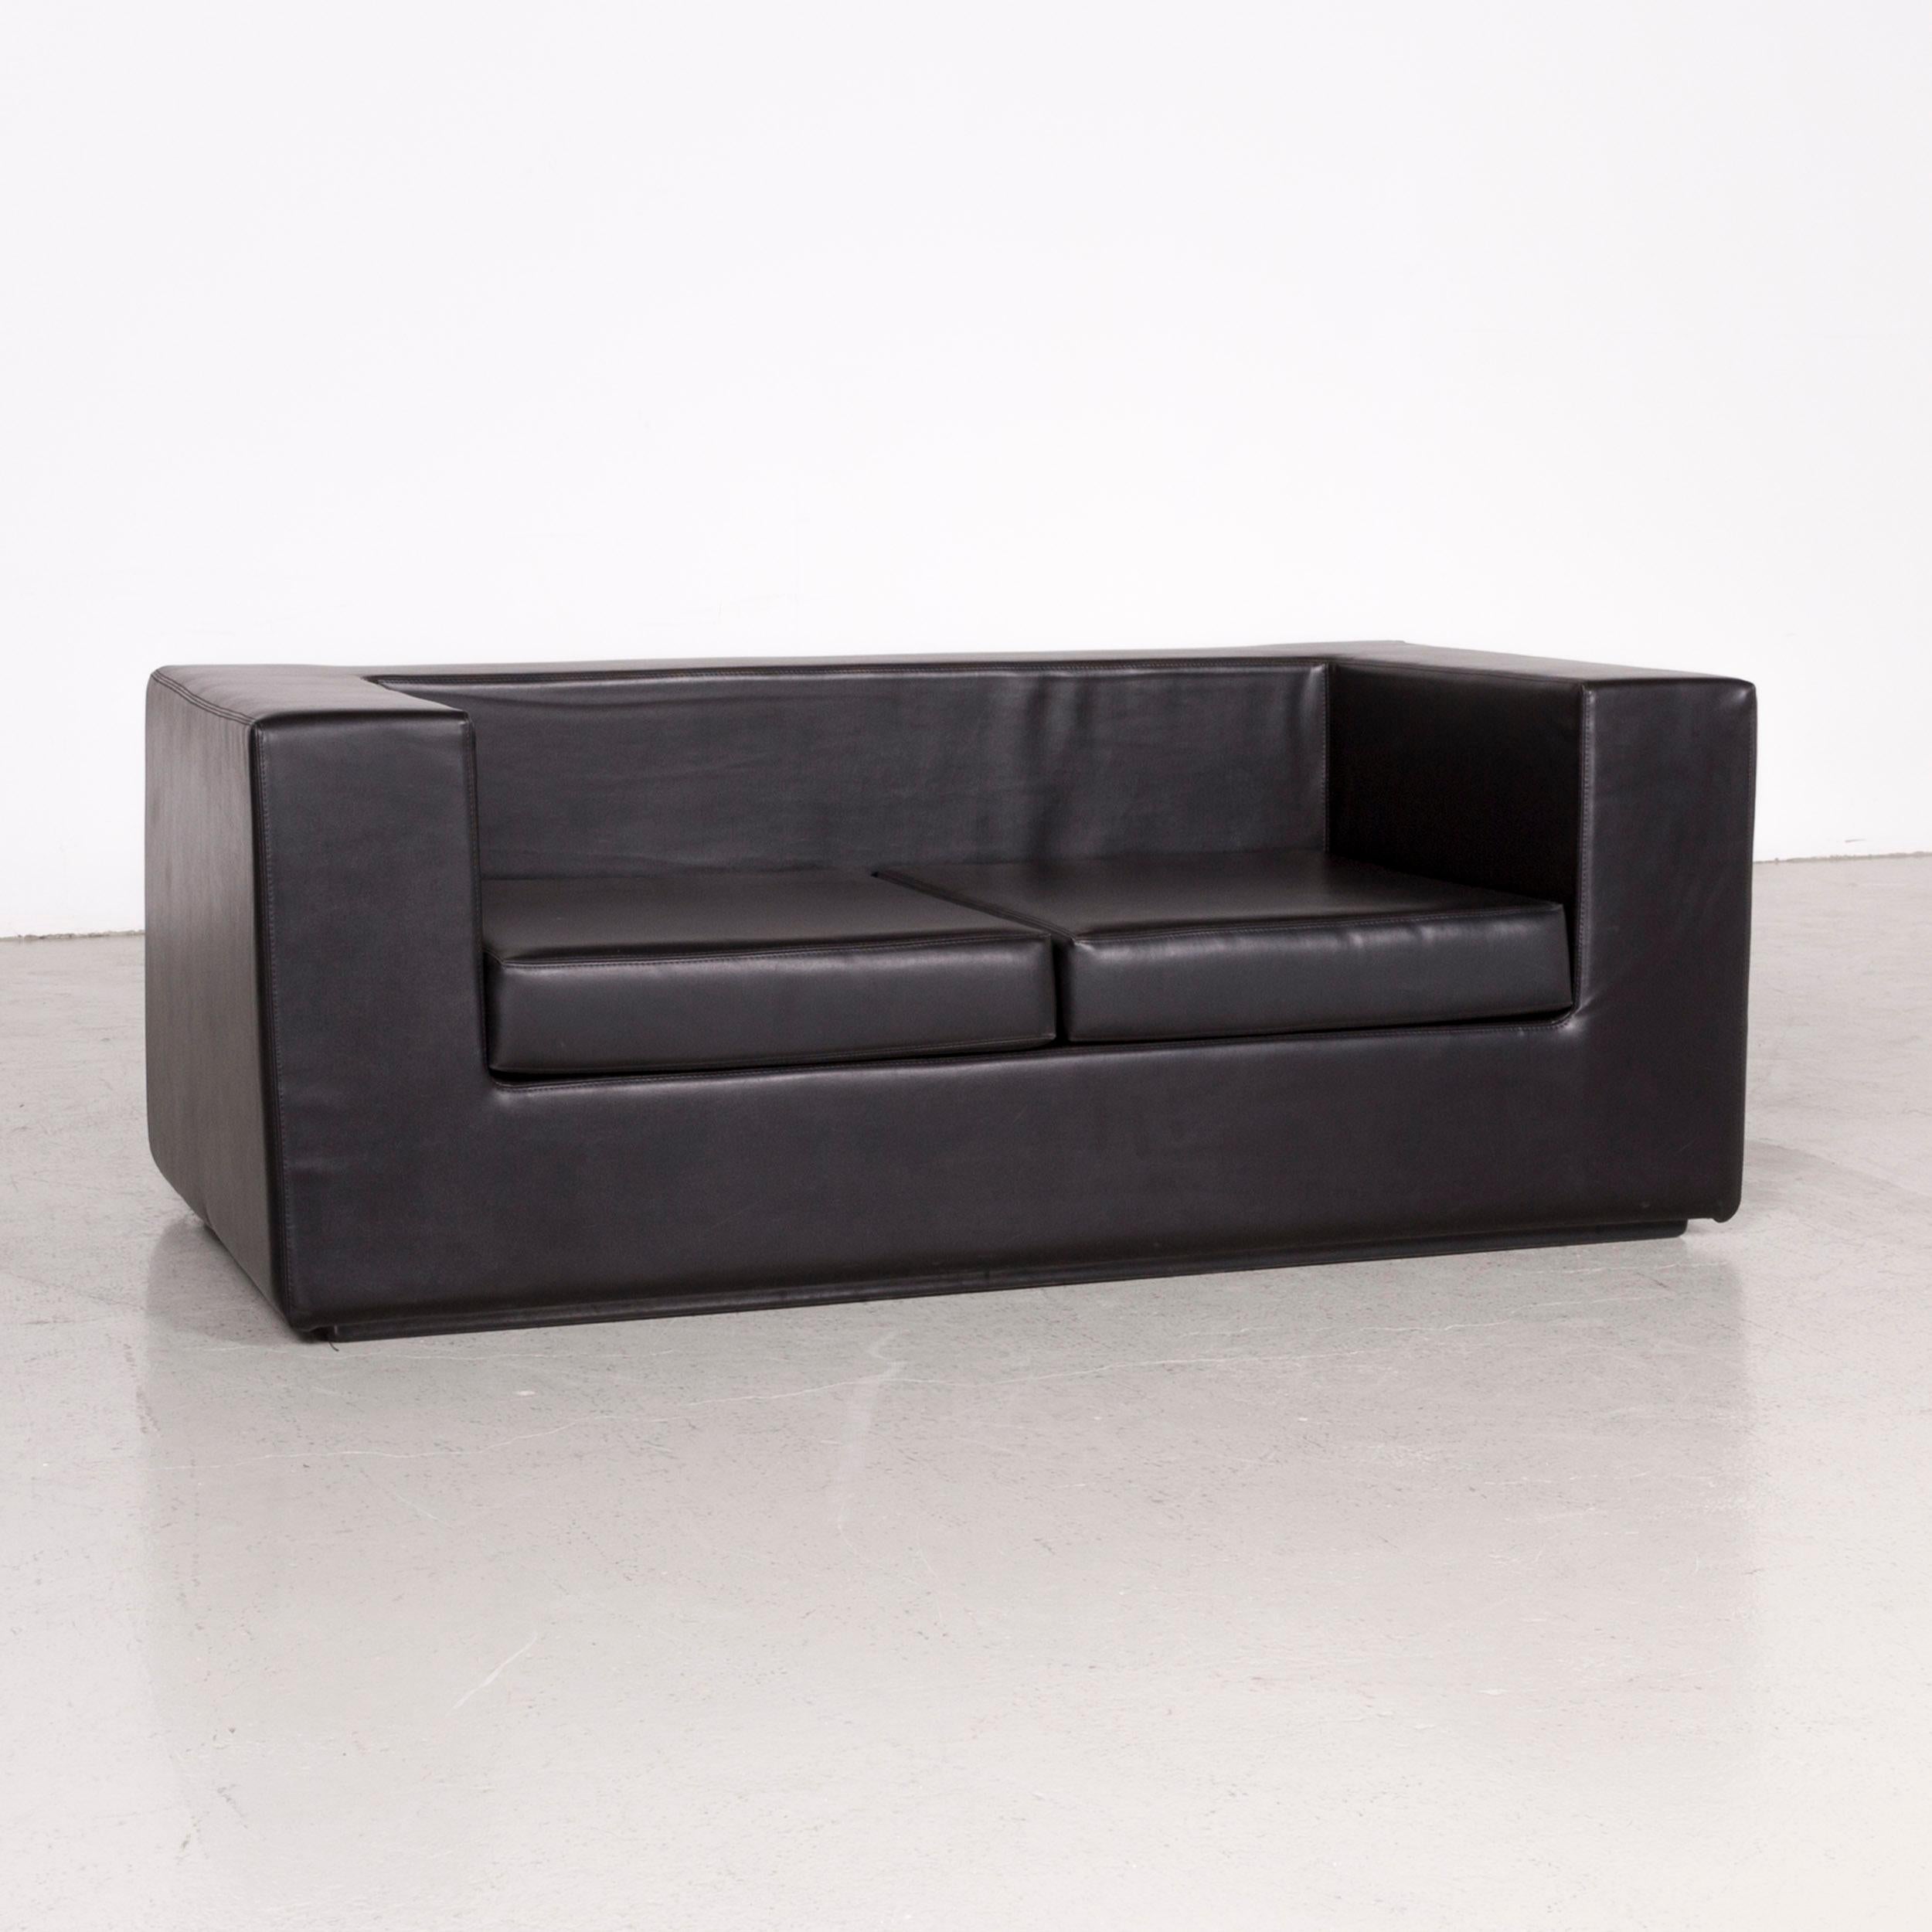 We bring to you a Zanotta Throw Away designer leather sofa black by Willie Landels real leather.
SKU: #7488

Product Measurements in centimeters:

Depth: 75
Width: 150
Height: 60
Seat-height: 35
Rest-height: 60
Seat-depth: 55
Seat-width: